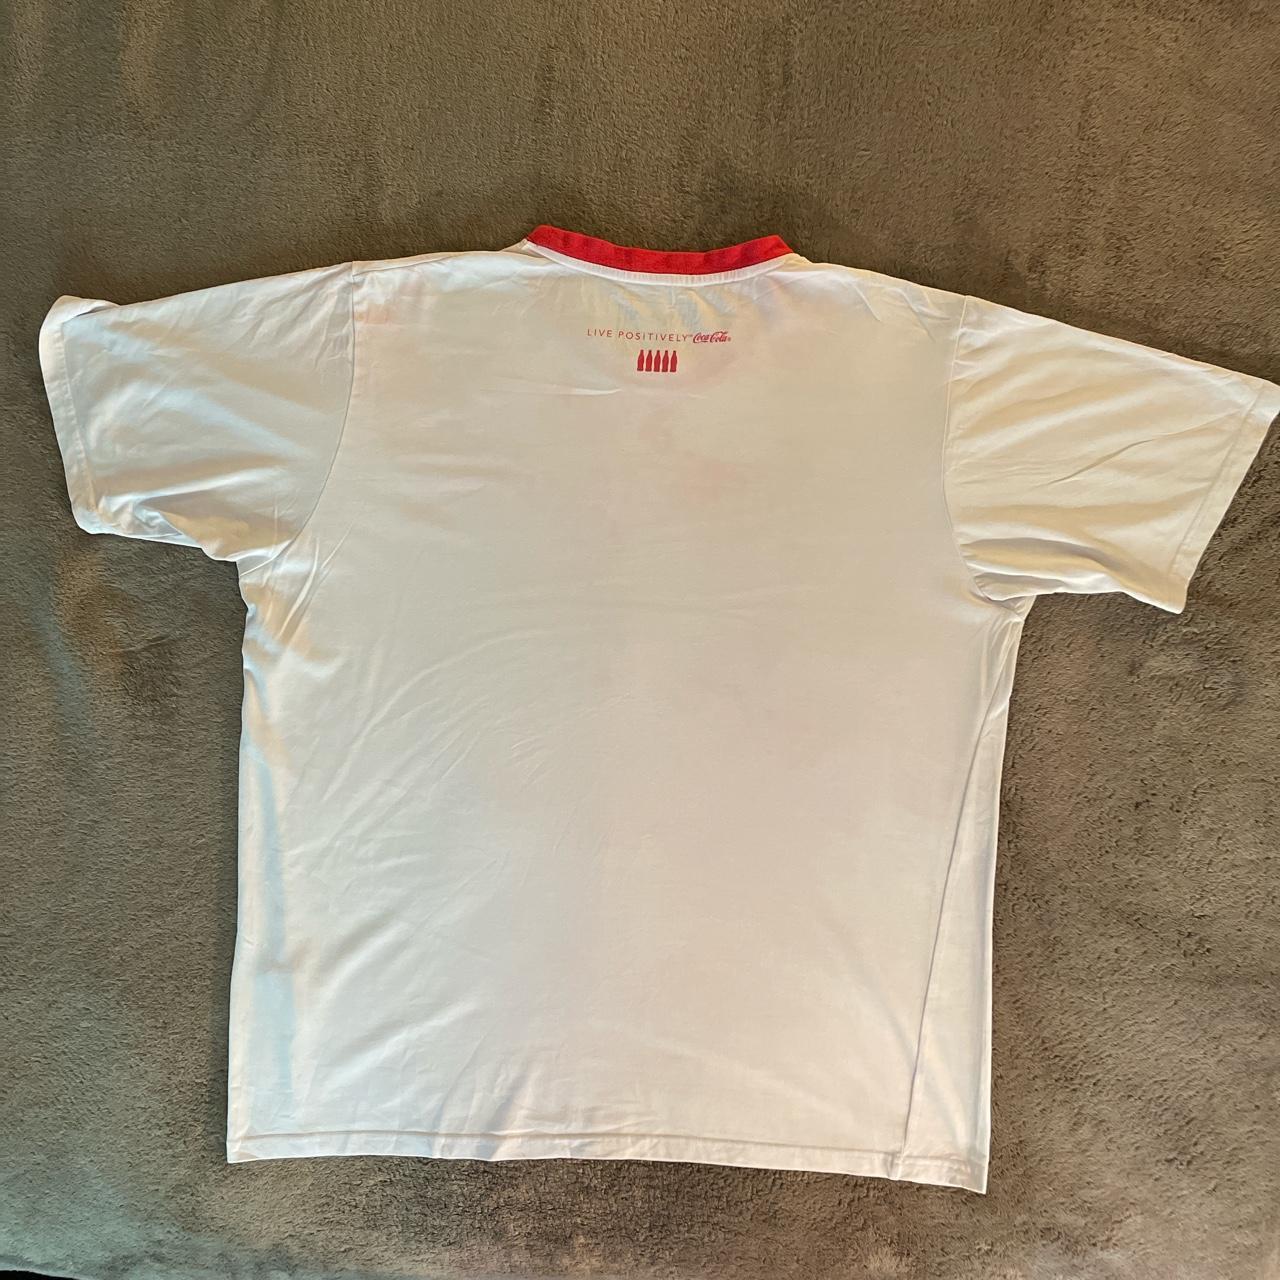 Coca-Cola Men's White and Red T-shirt | Depop